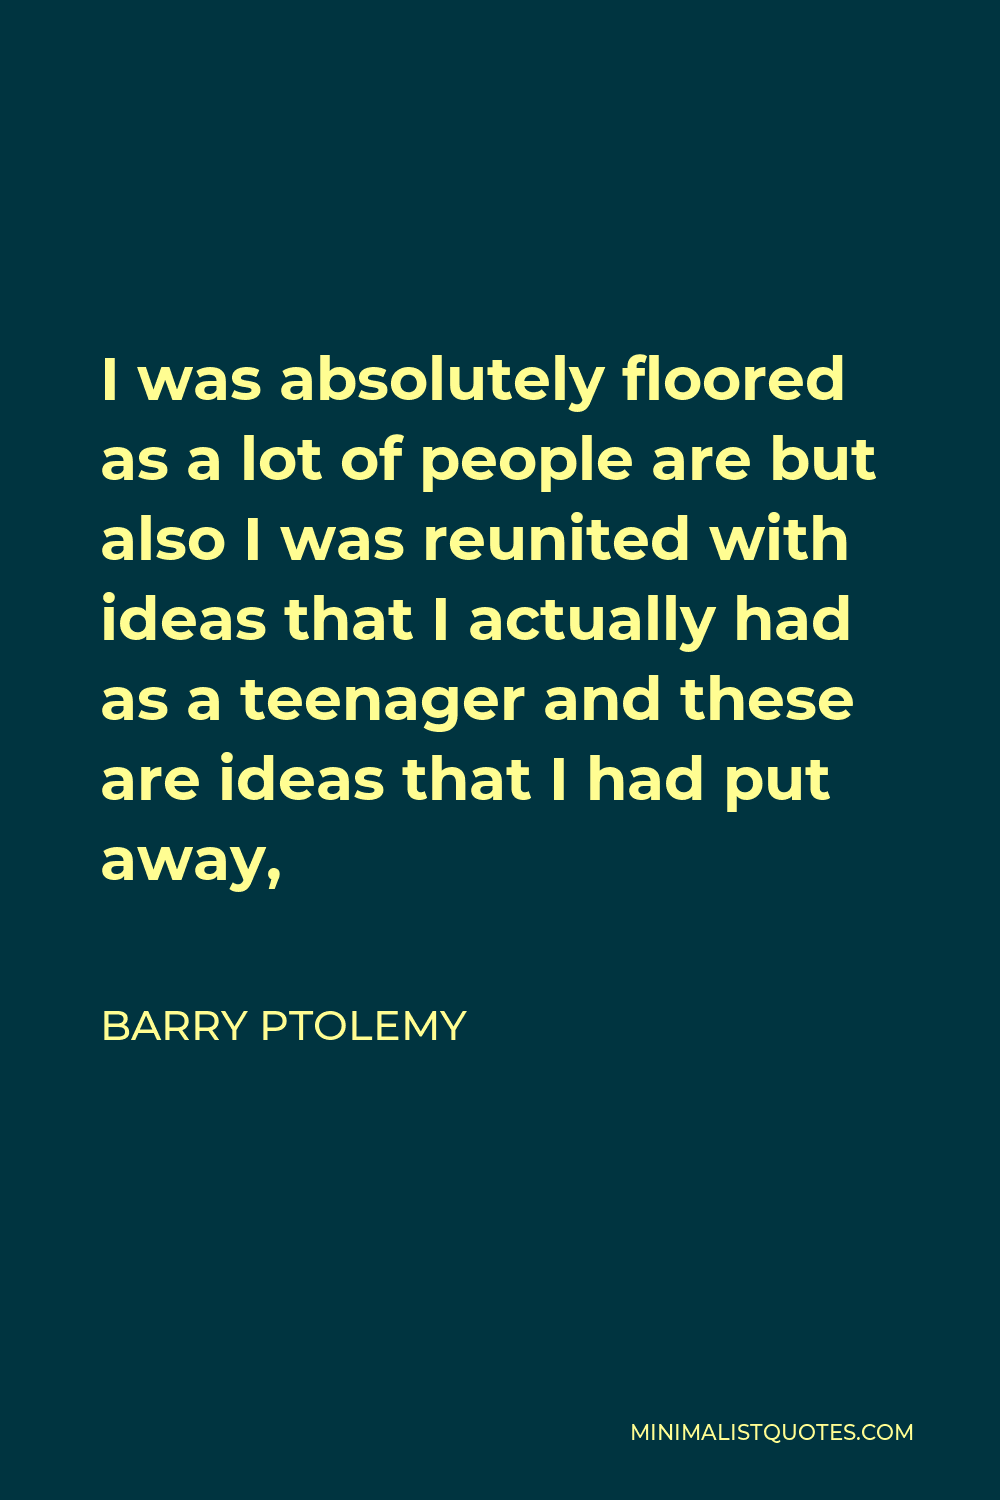 Barry Ptolemy Quote - I was absolutely floored as a lot of people are but also I was reunited with ideas that I actually had as a teenager and these are ideas that I had put away,